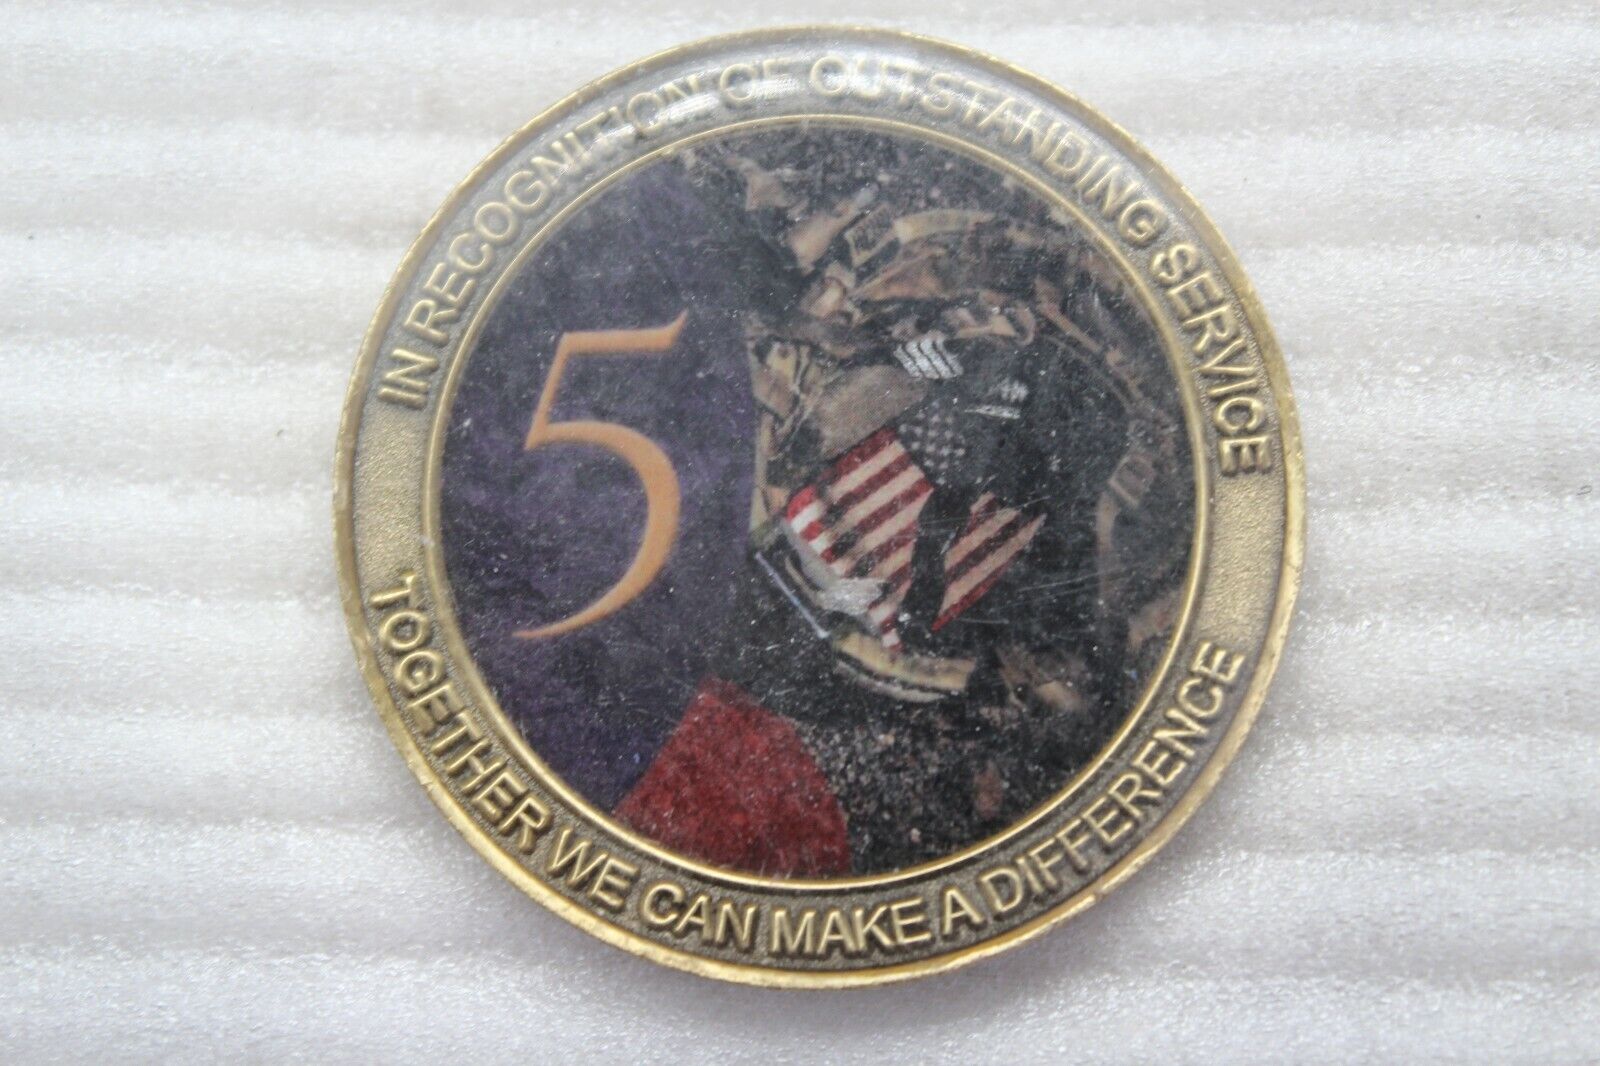 The USU/NIH Military Traumatic Brain Injury Research Group Challenge Coin